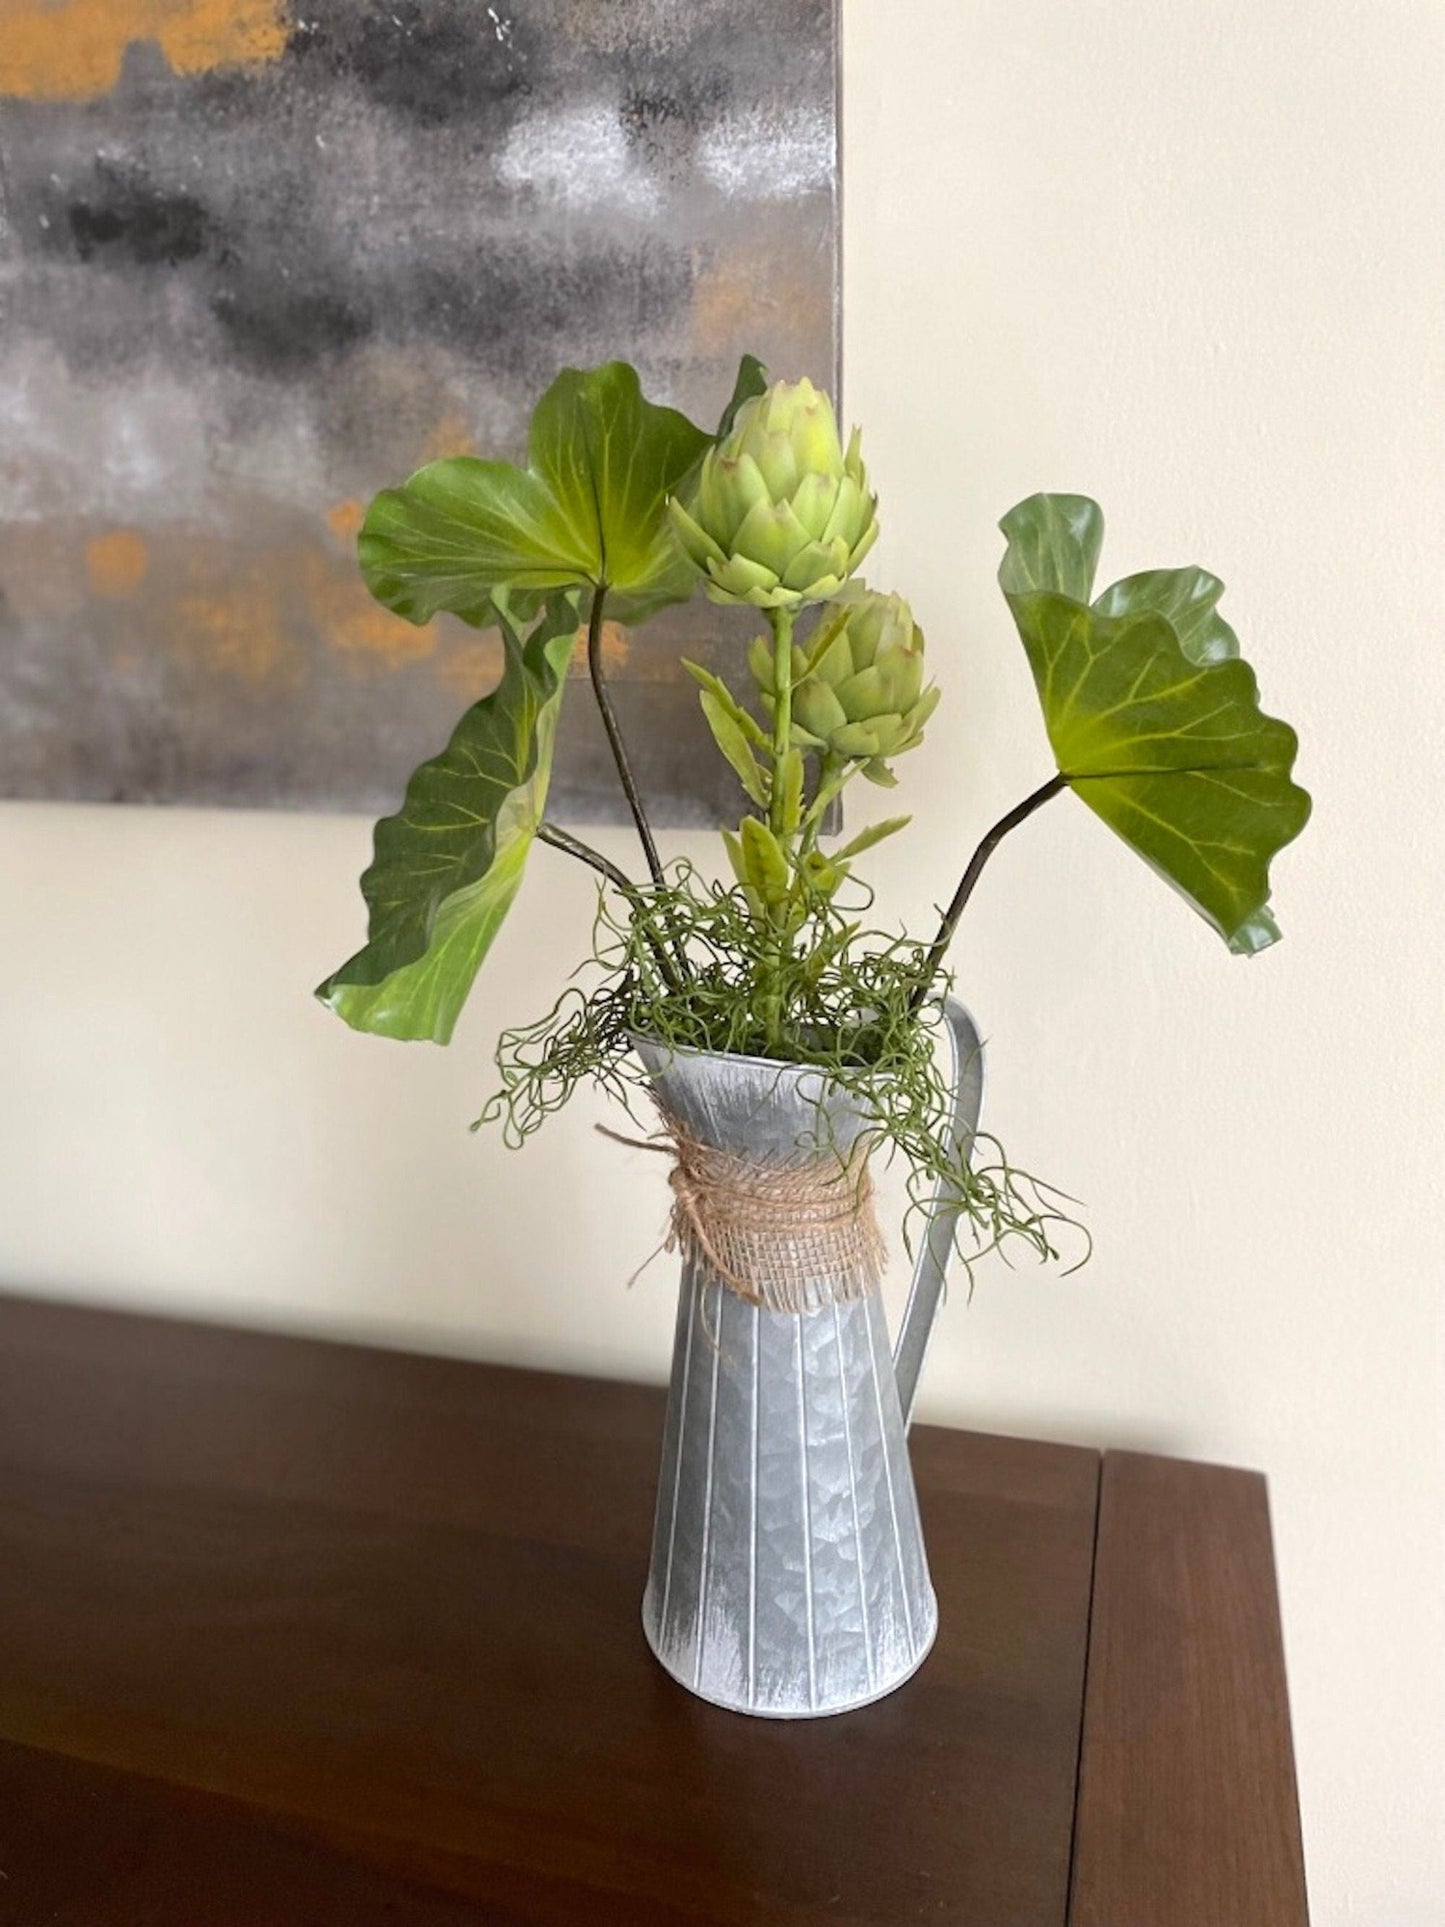 Tall Farmhouse Arrangement in Metal Pitcher Vase, Everyday Greenery Home Decor